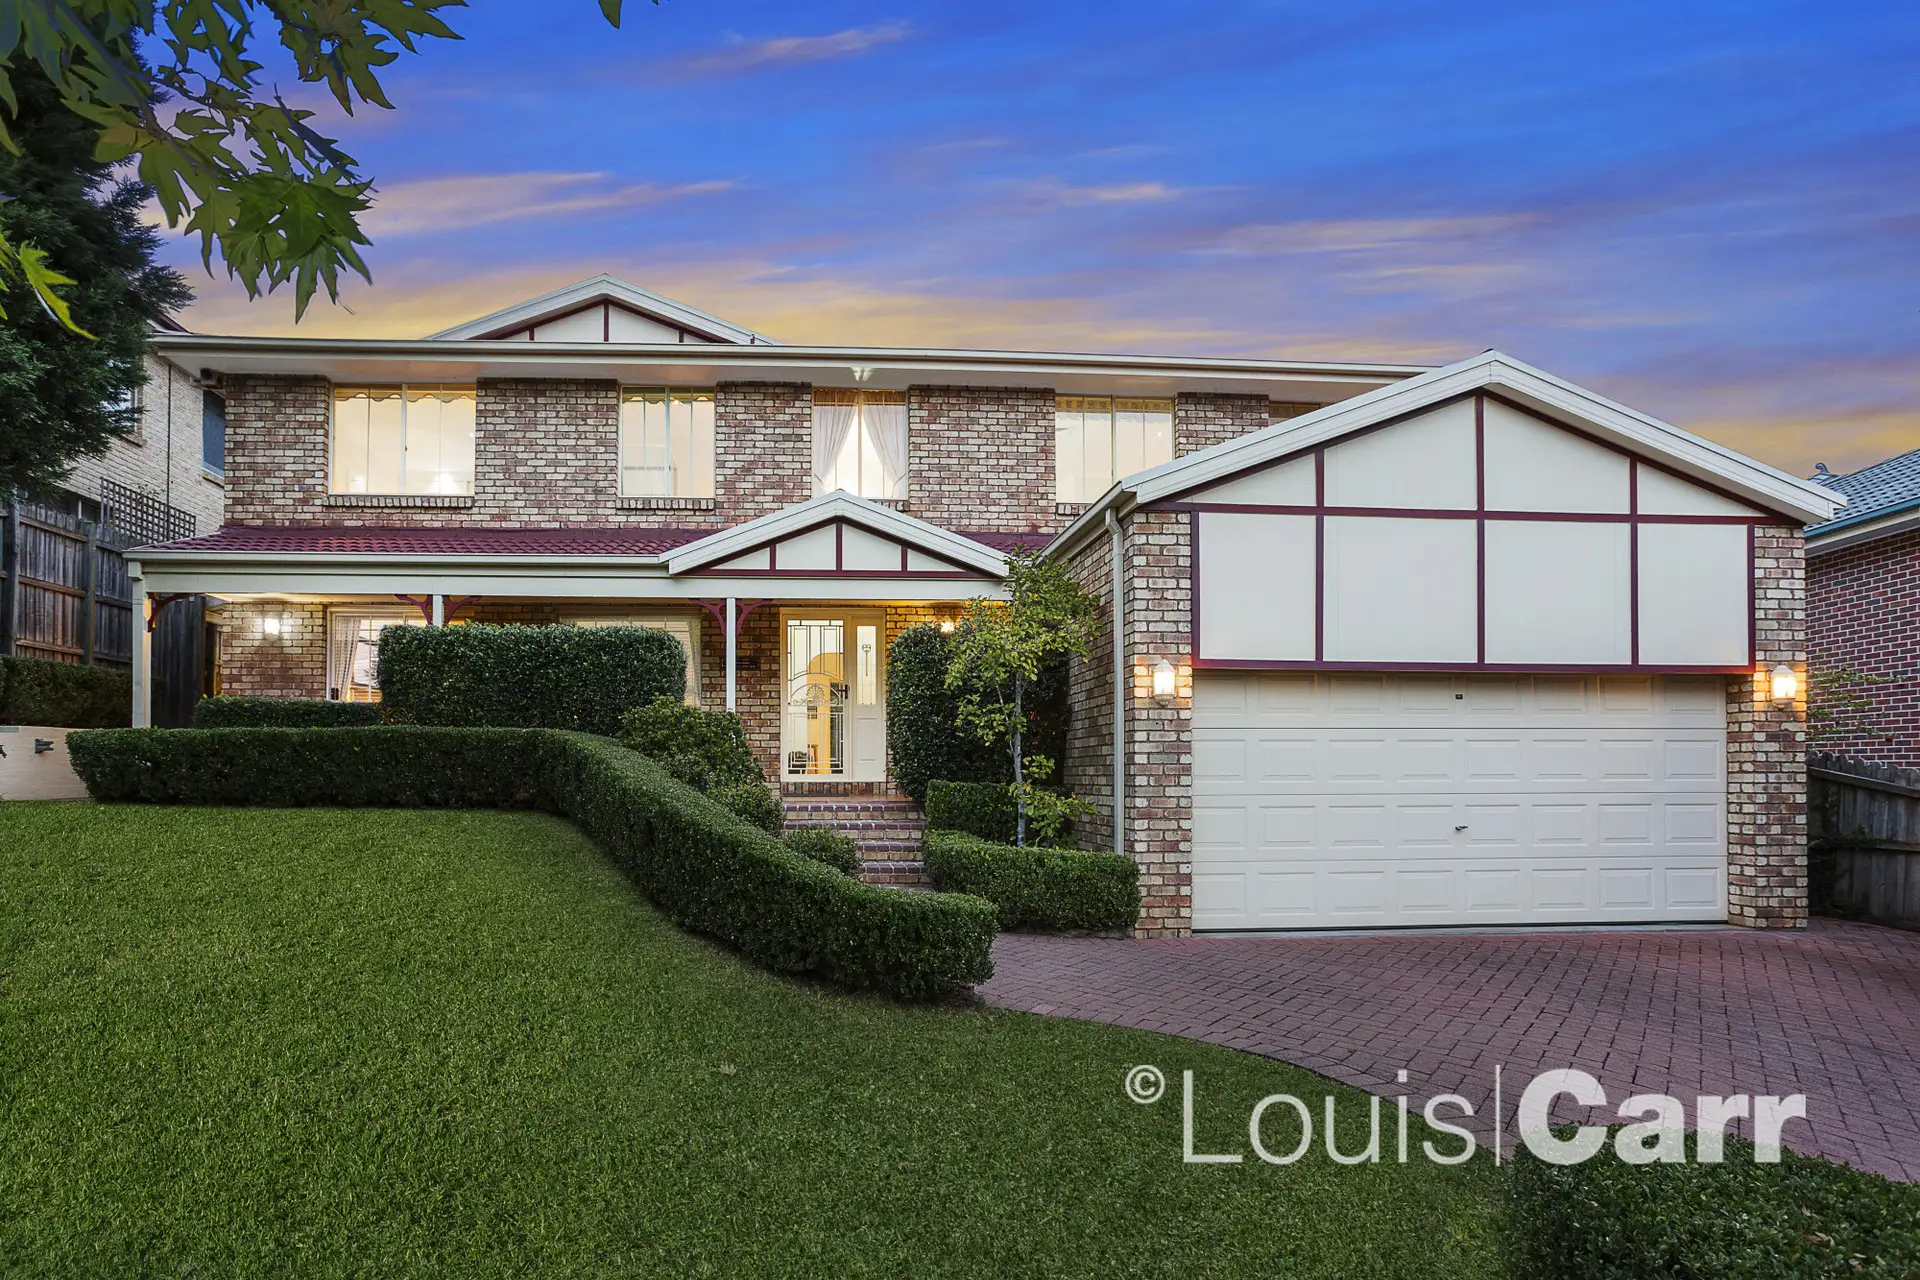 Photo #1: 32 The Glade, West Pennant Hills - Sold by Louis Carr Real Estate